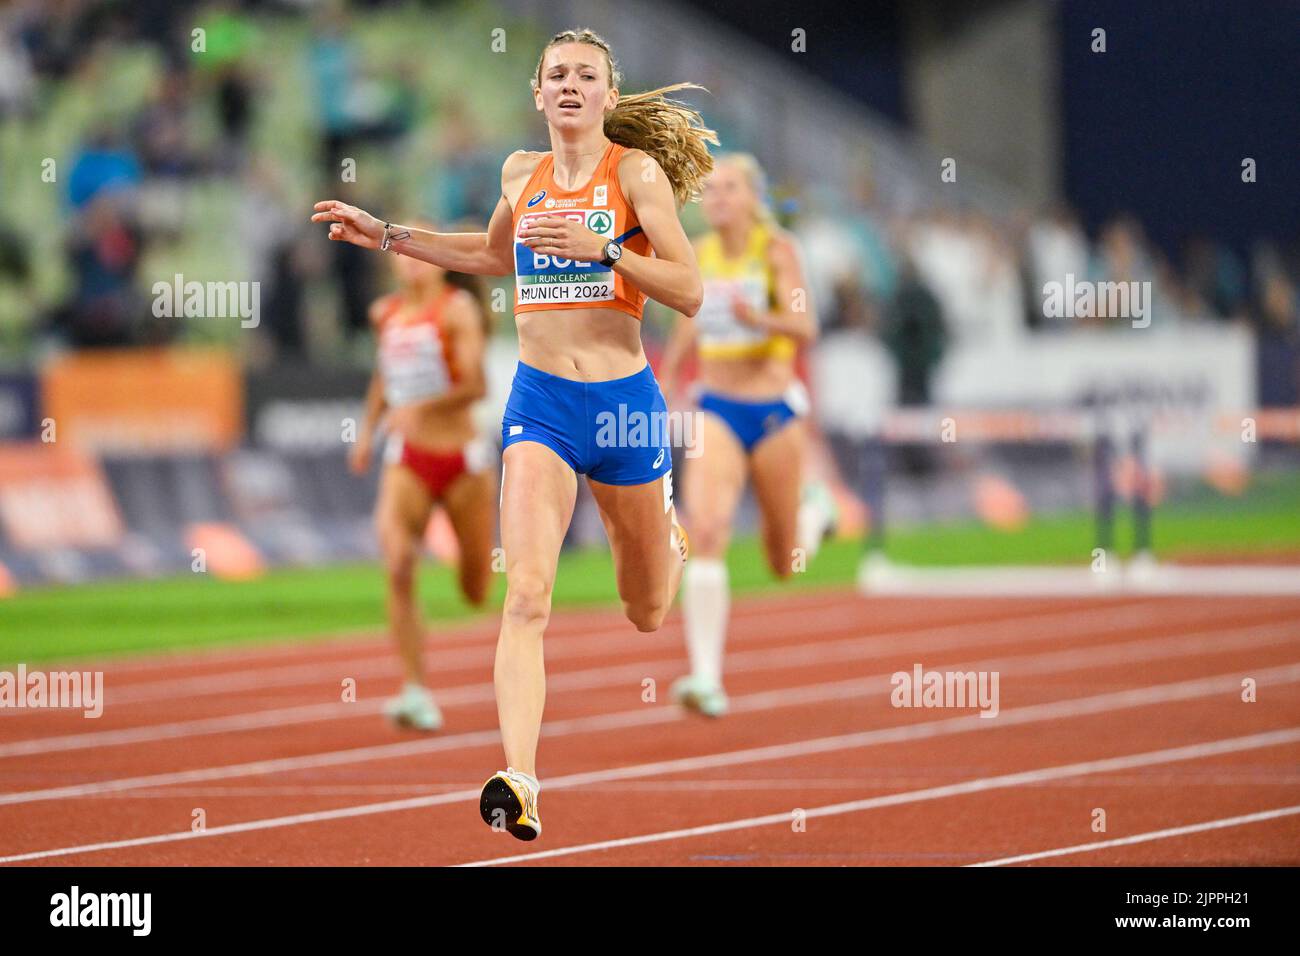 MUNCHEN, GERMANY - AUGUST 19: Femke Bol of the Netherlands competing in Women's 400m Hurdles at the European Championships Munich 2022 at the Olympiastadion on August 19, 2022 in Munchen, Germany (Photo by Andy Astfalck/BSR Agency) Stock Photo